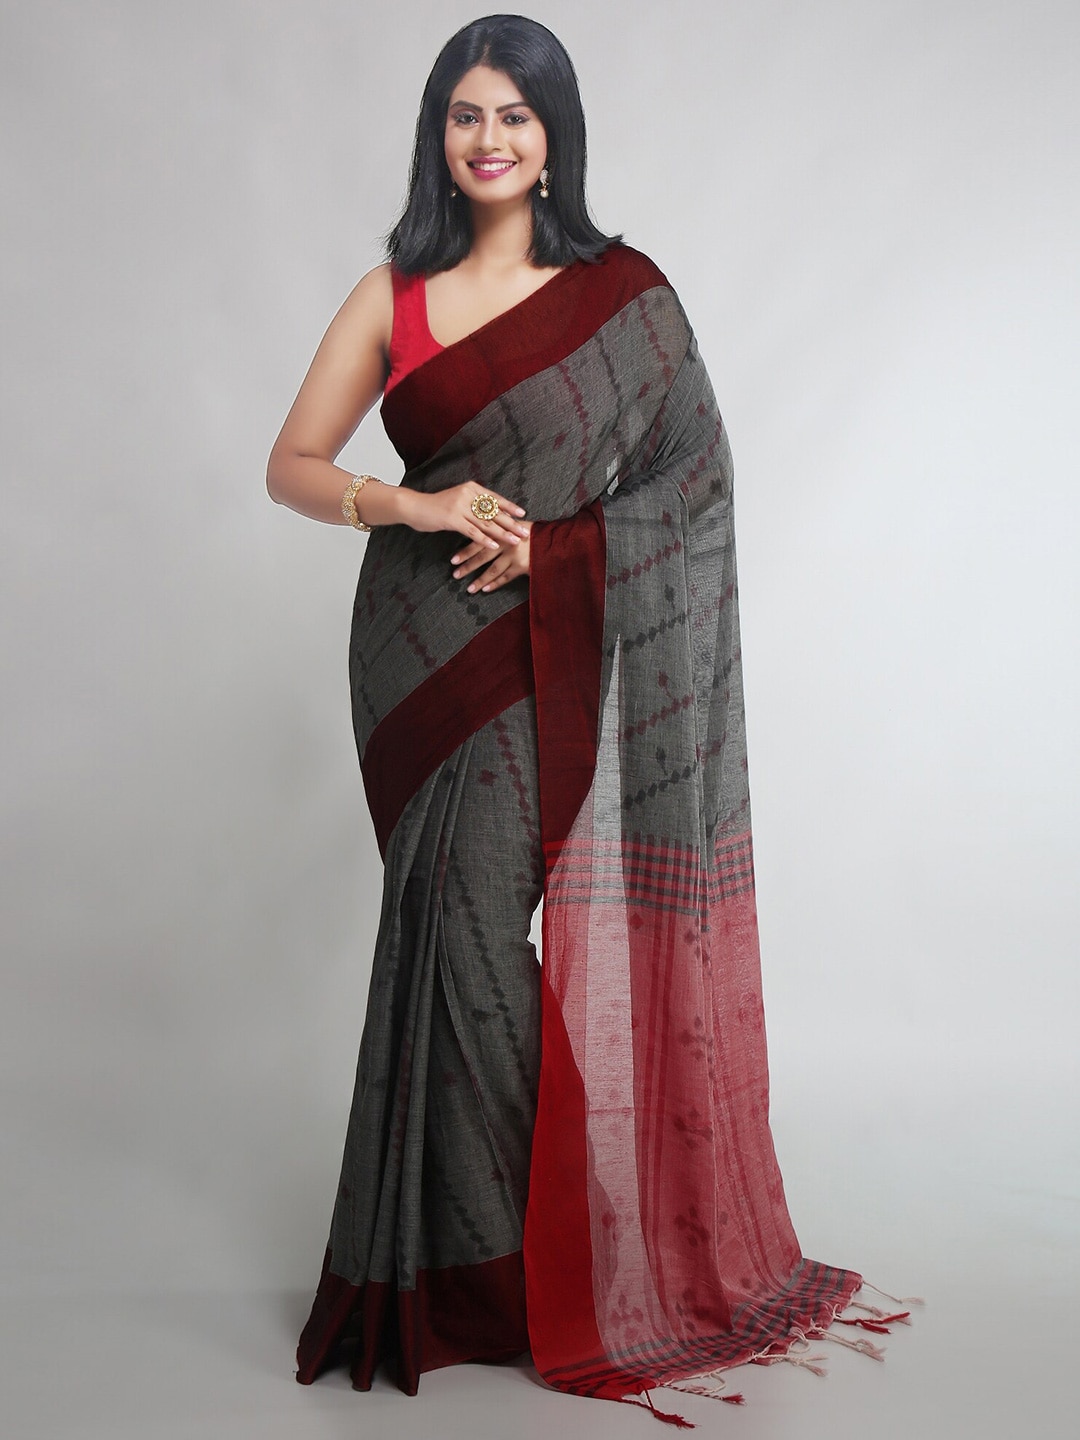 WoodenTant Ethnic Motifs Printed Pure Cotton Saree Price in India